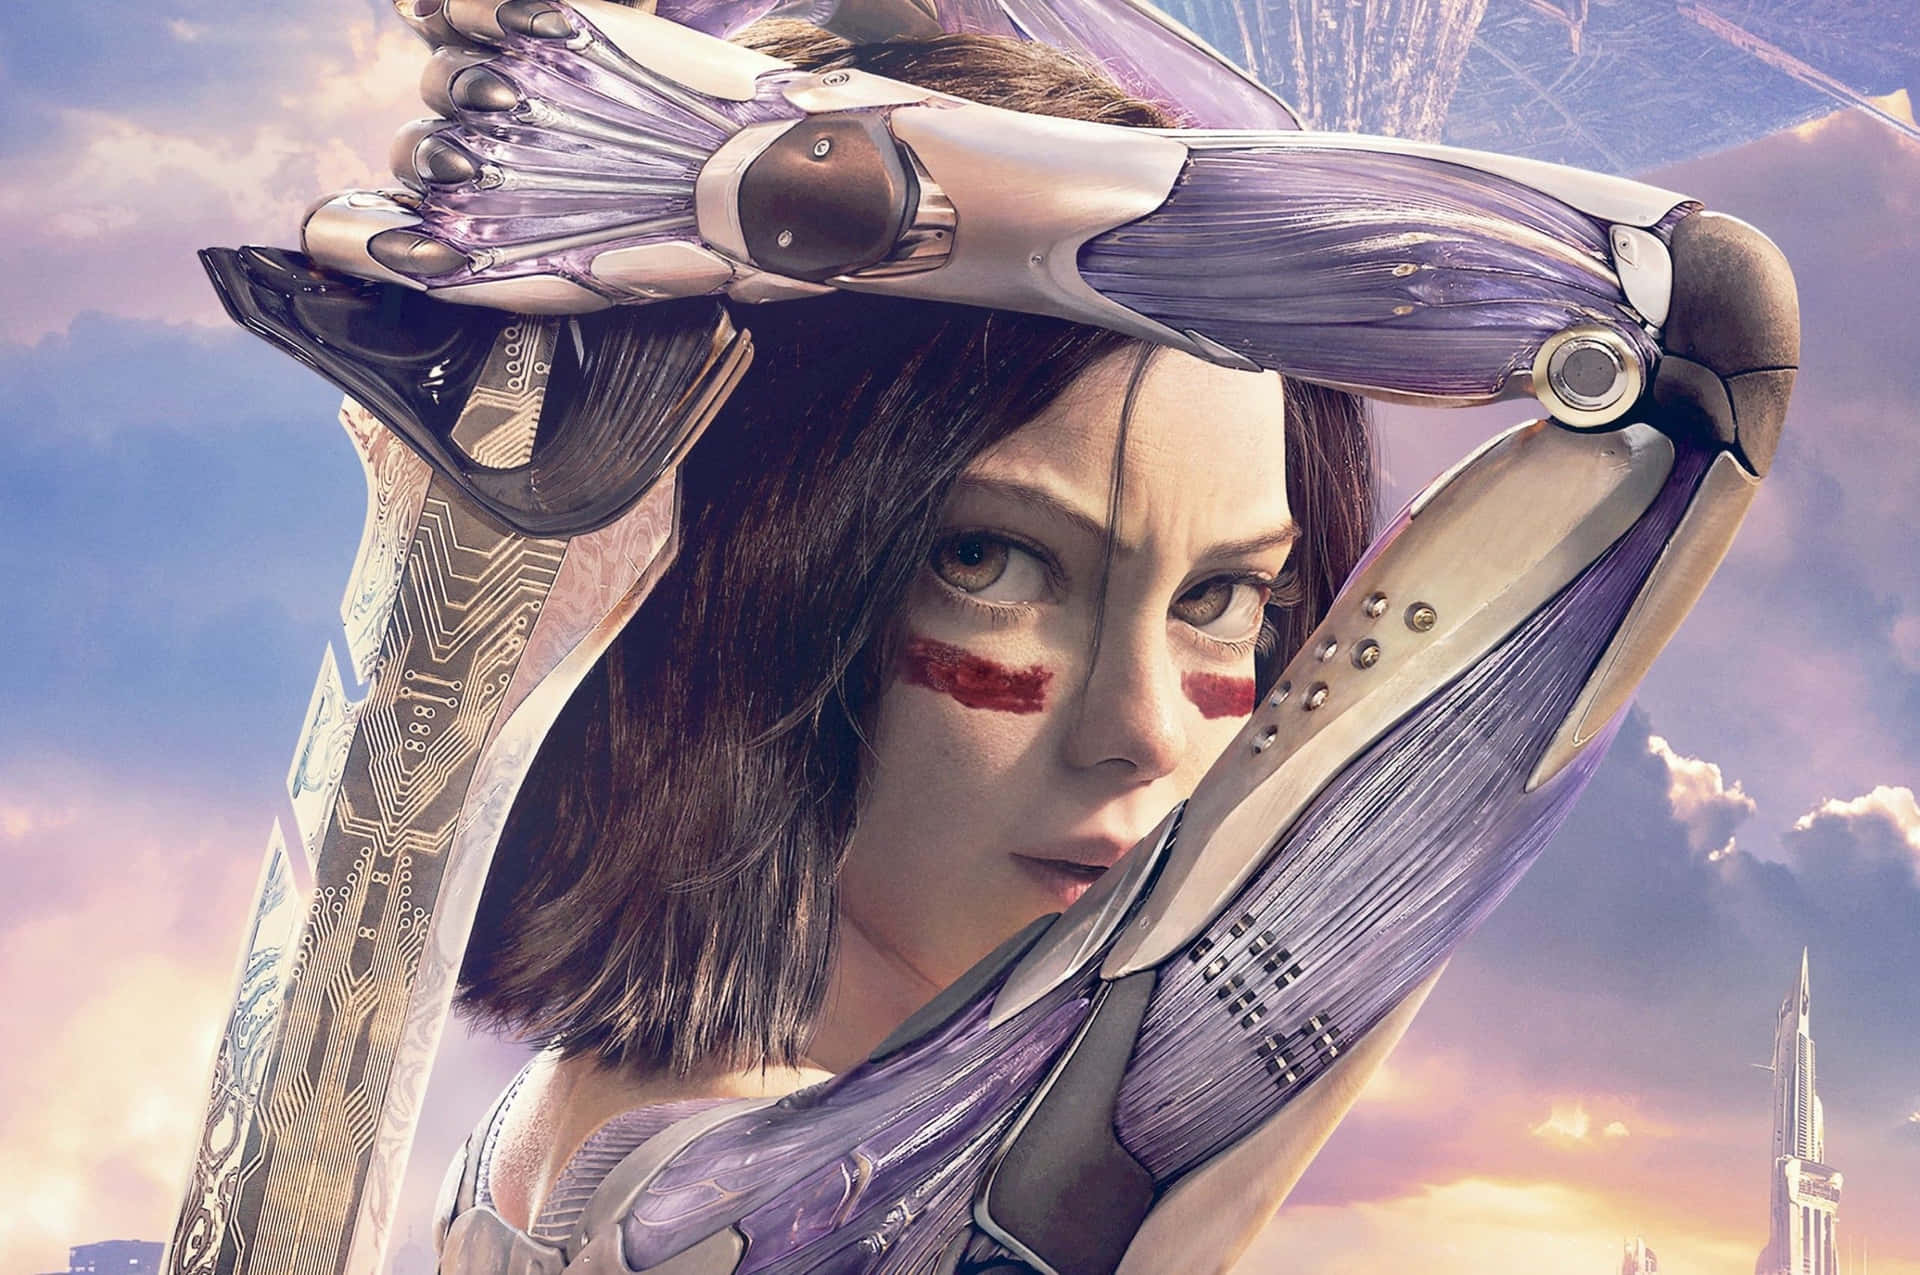 Experience the action-packed adventure of Alita: Battle Angel